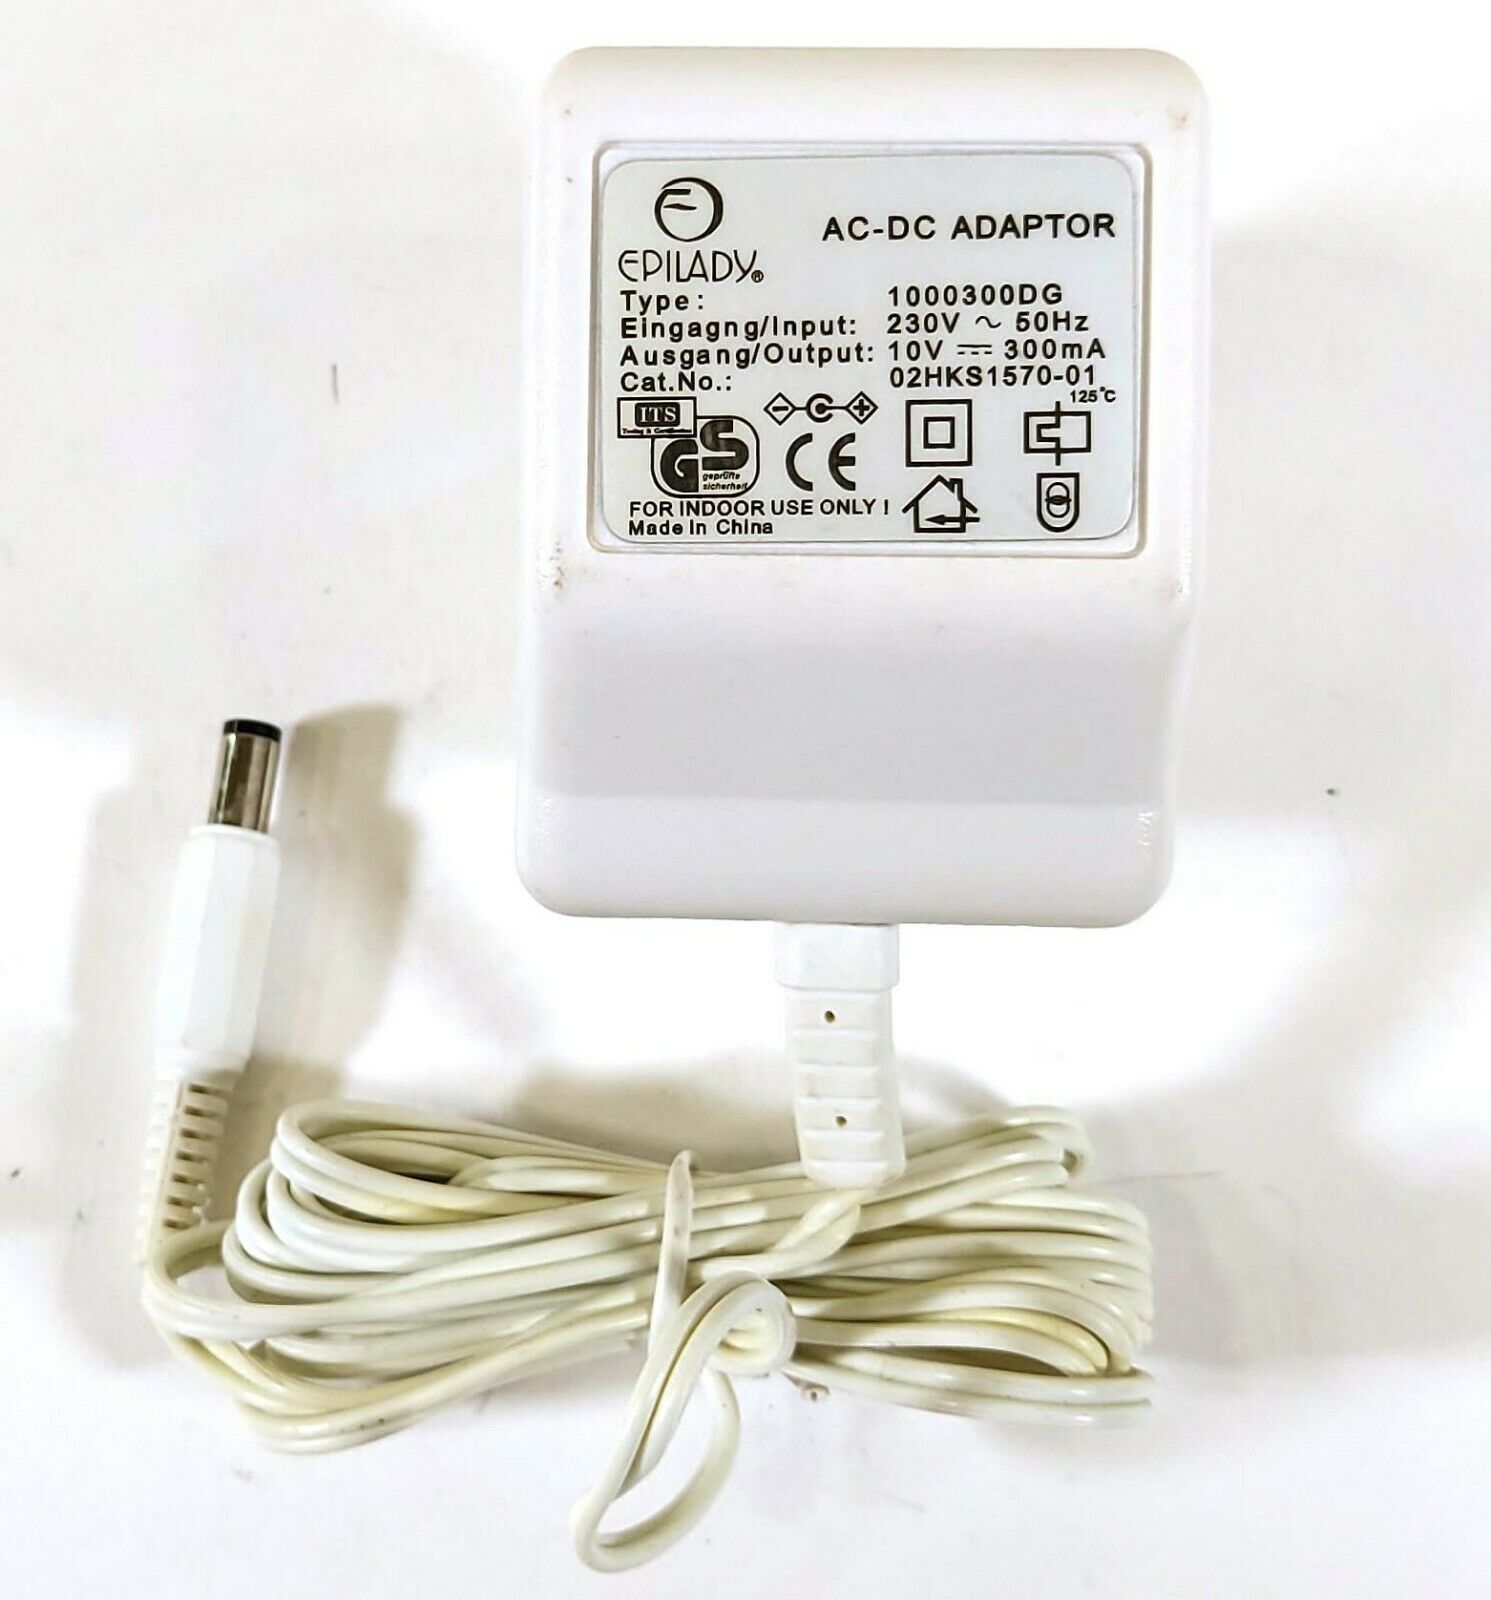 GS Epilady 1000300DG AC/DC Adapter 10V 300mA Original Charger Power Supply D274 Output Current: 300 mA Compatible Bran - Click Image to Close